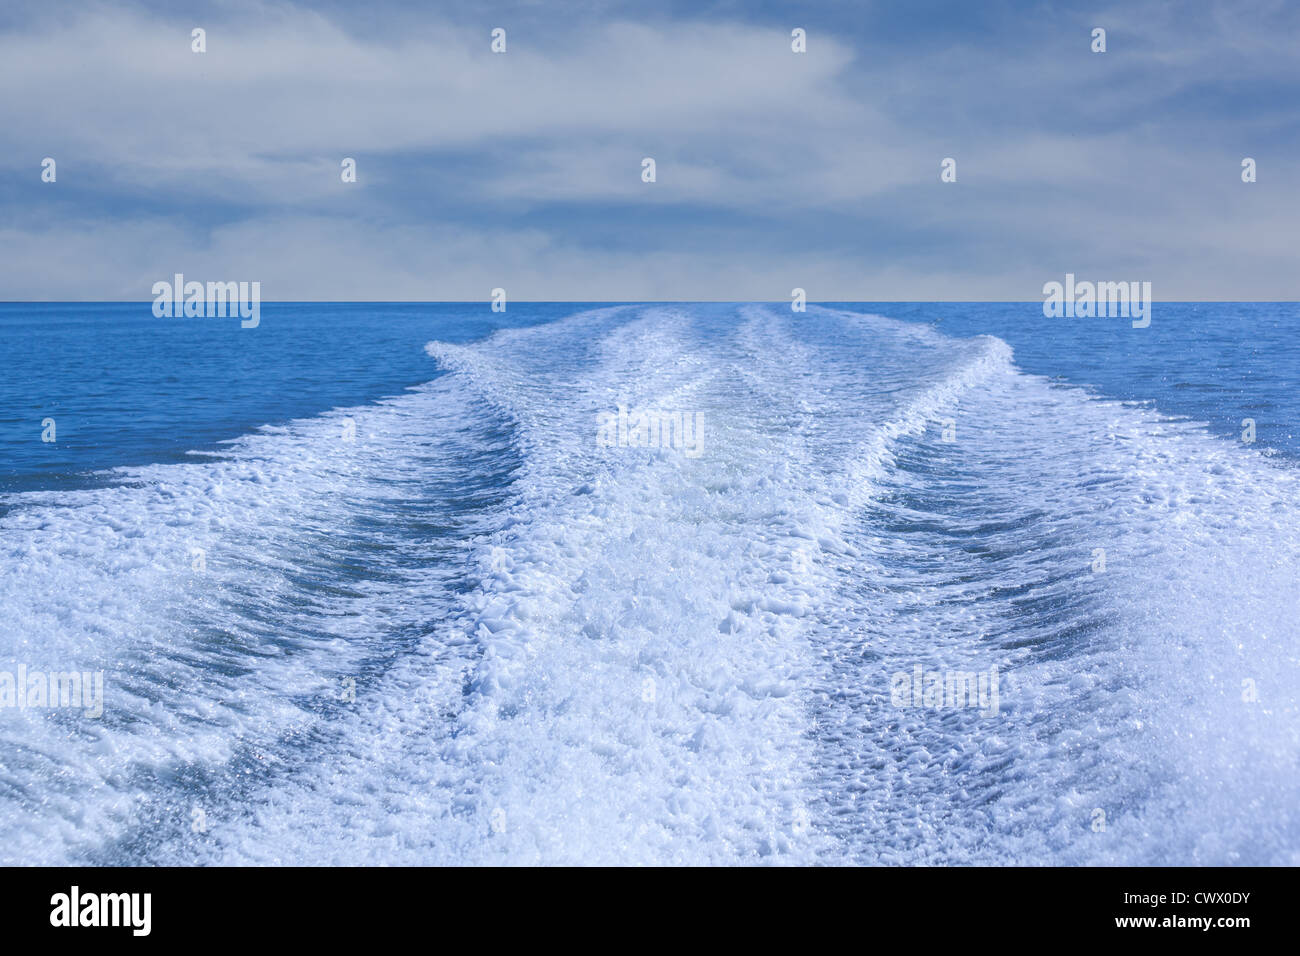 sea waves on a boat showing the horizon Stock Photo